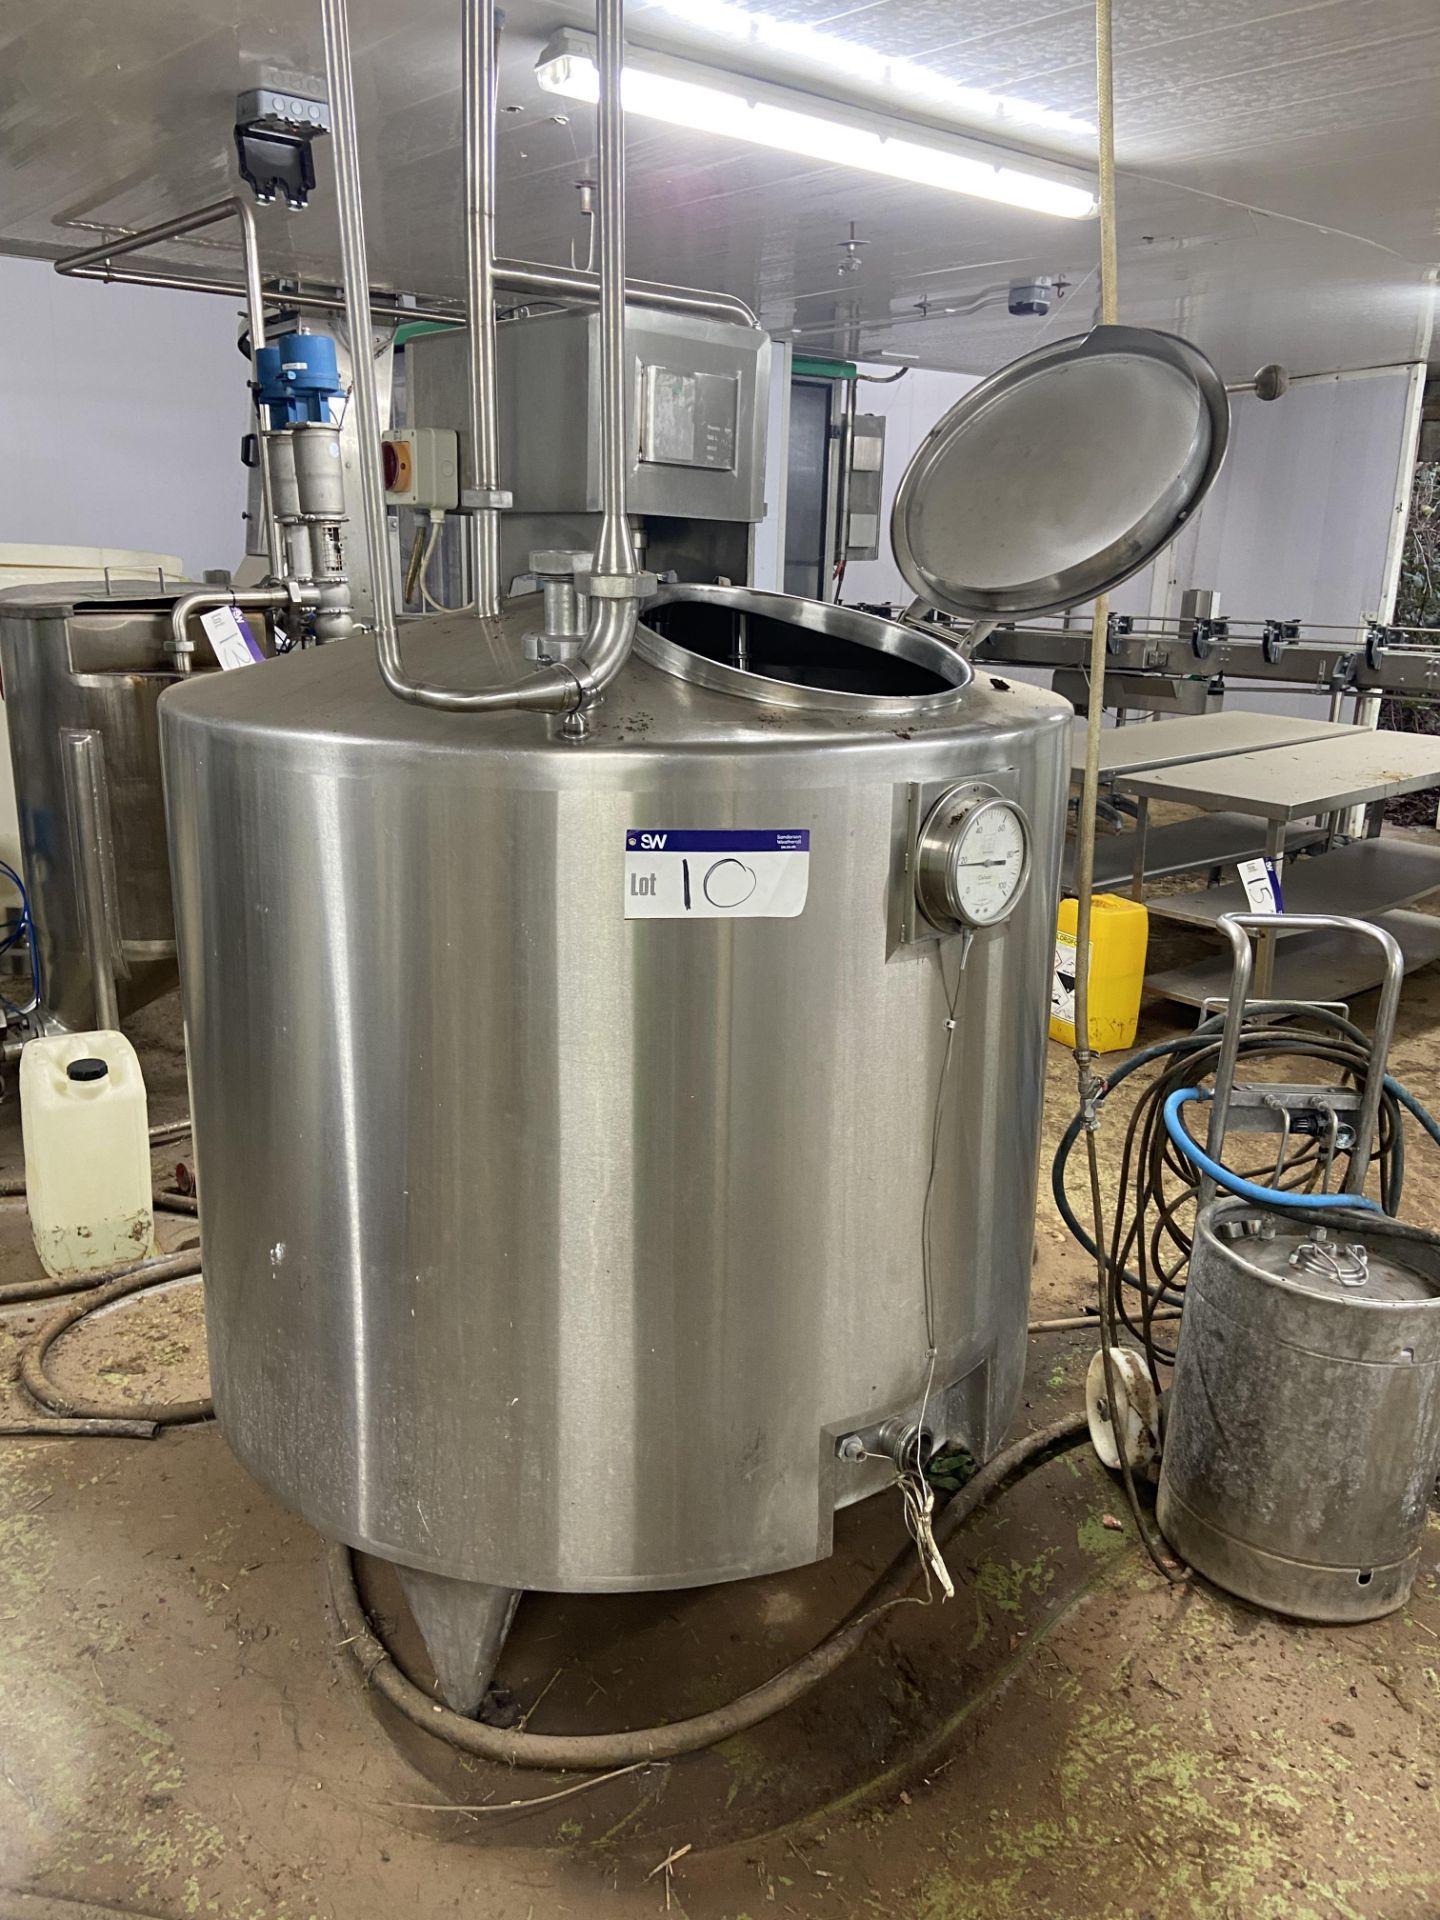 STAINLESS STEEL 1000 litre CREAM MIXING VESSEL, serial no. 881531, approx. 1.3m x 1.1m deep, with - Image 2 of 6